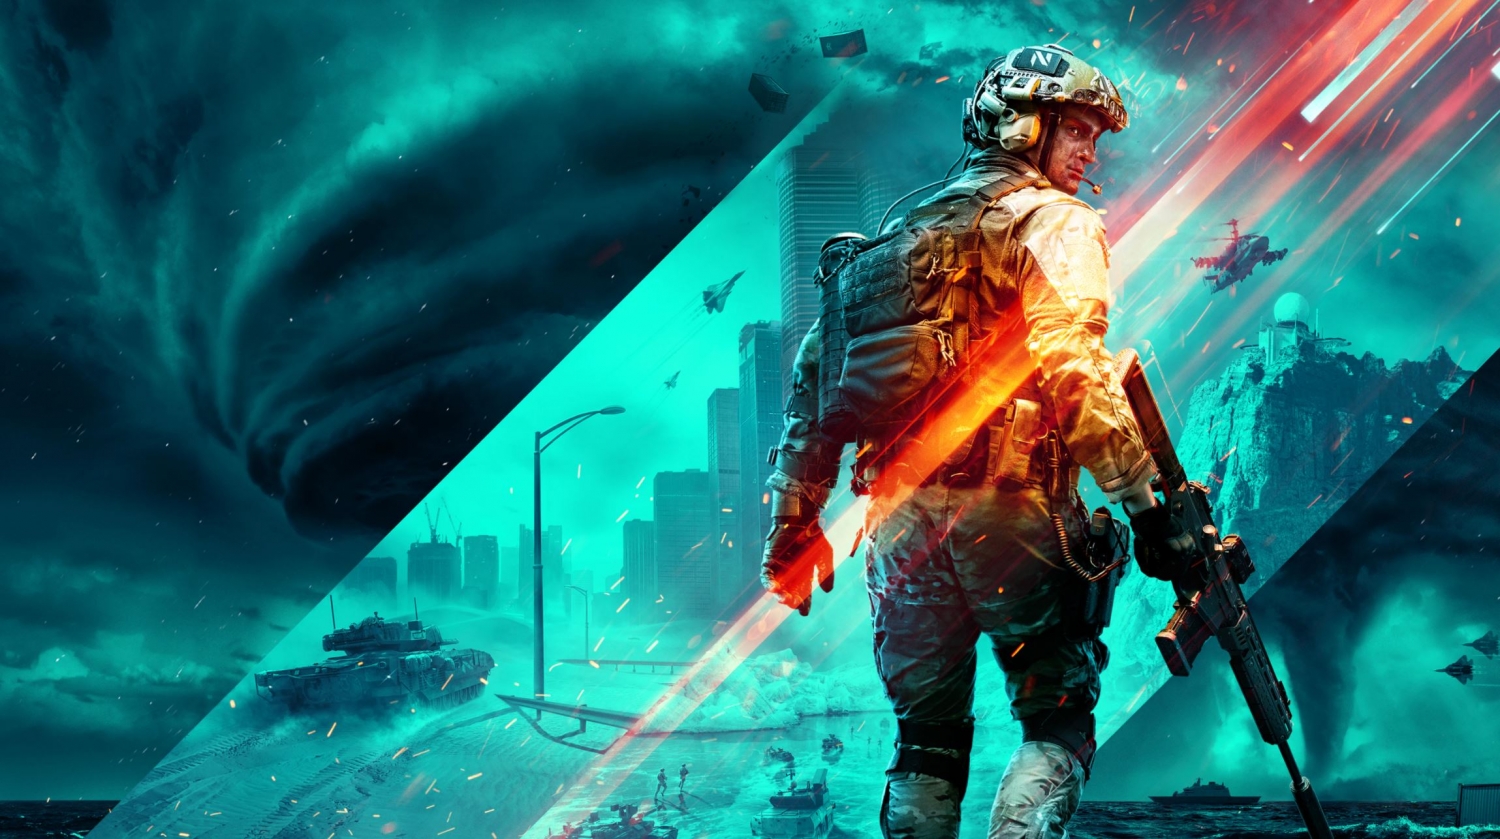 Battlefield 2042' Has Been Revealed, but Is the Game Cross-Platform?